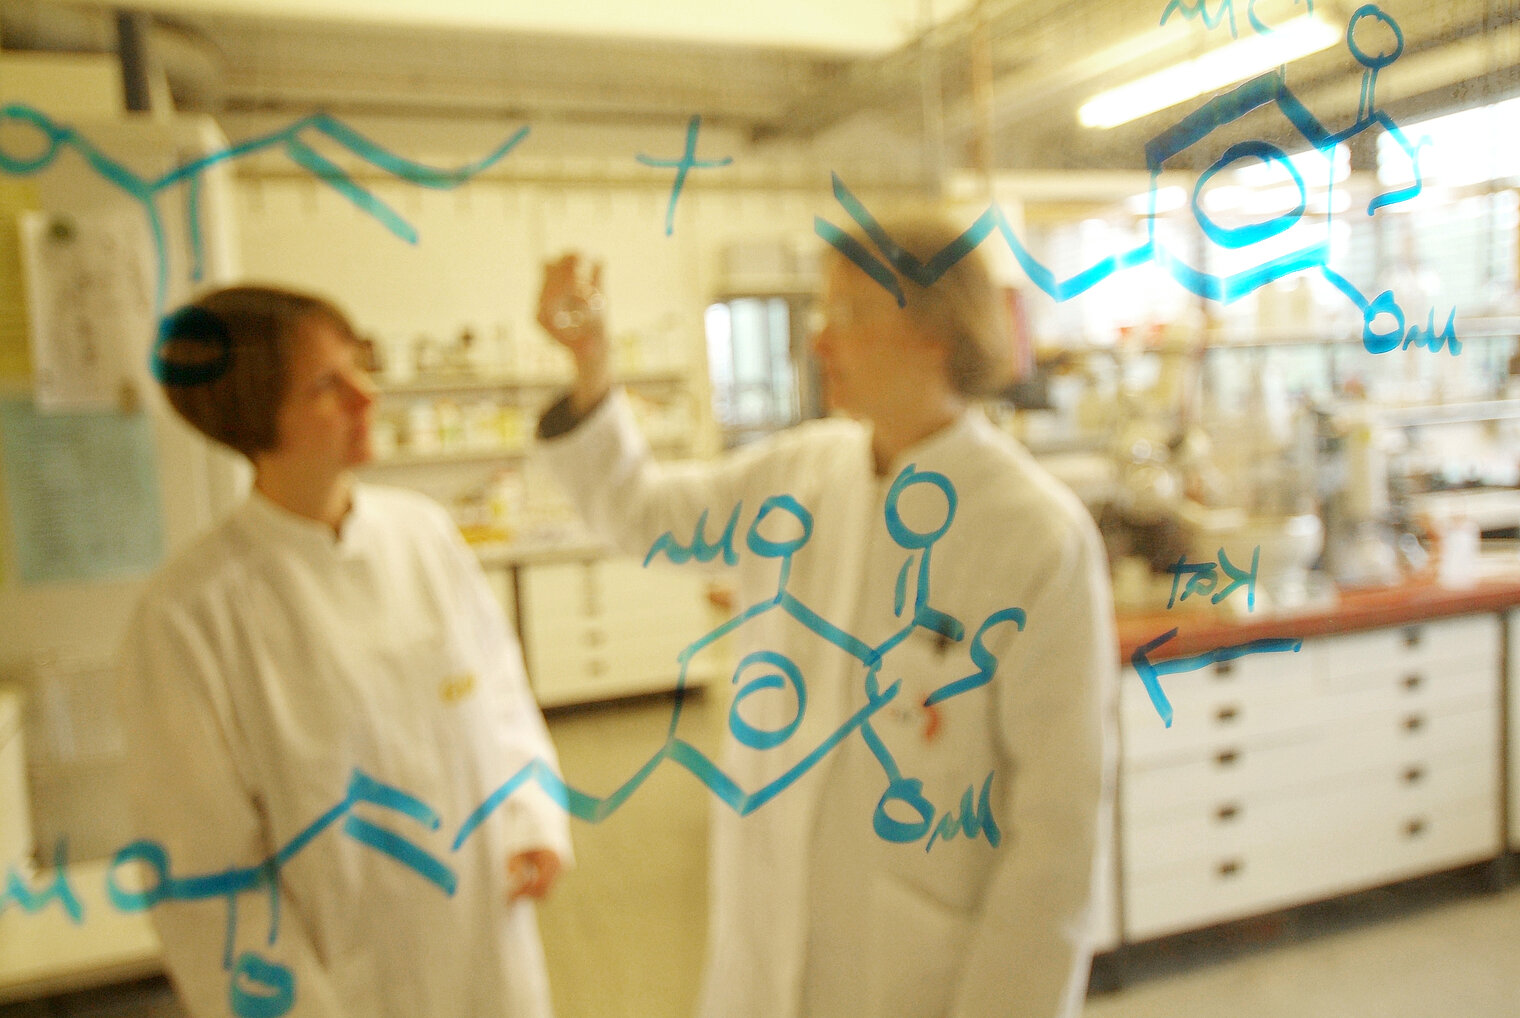 HZI researchers in the chemistry lab